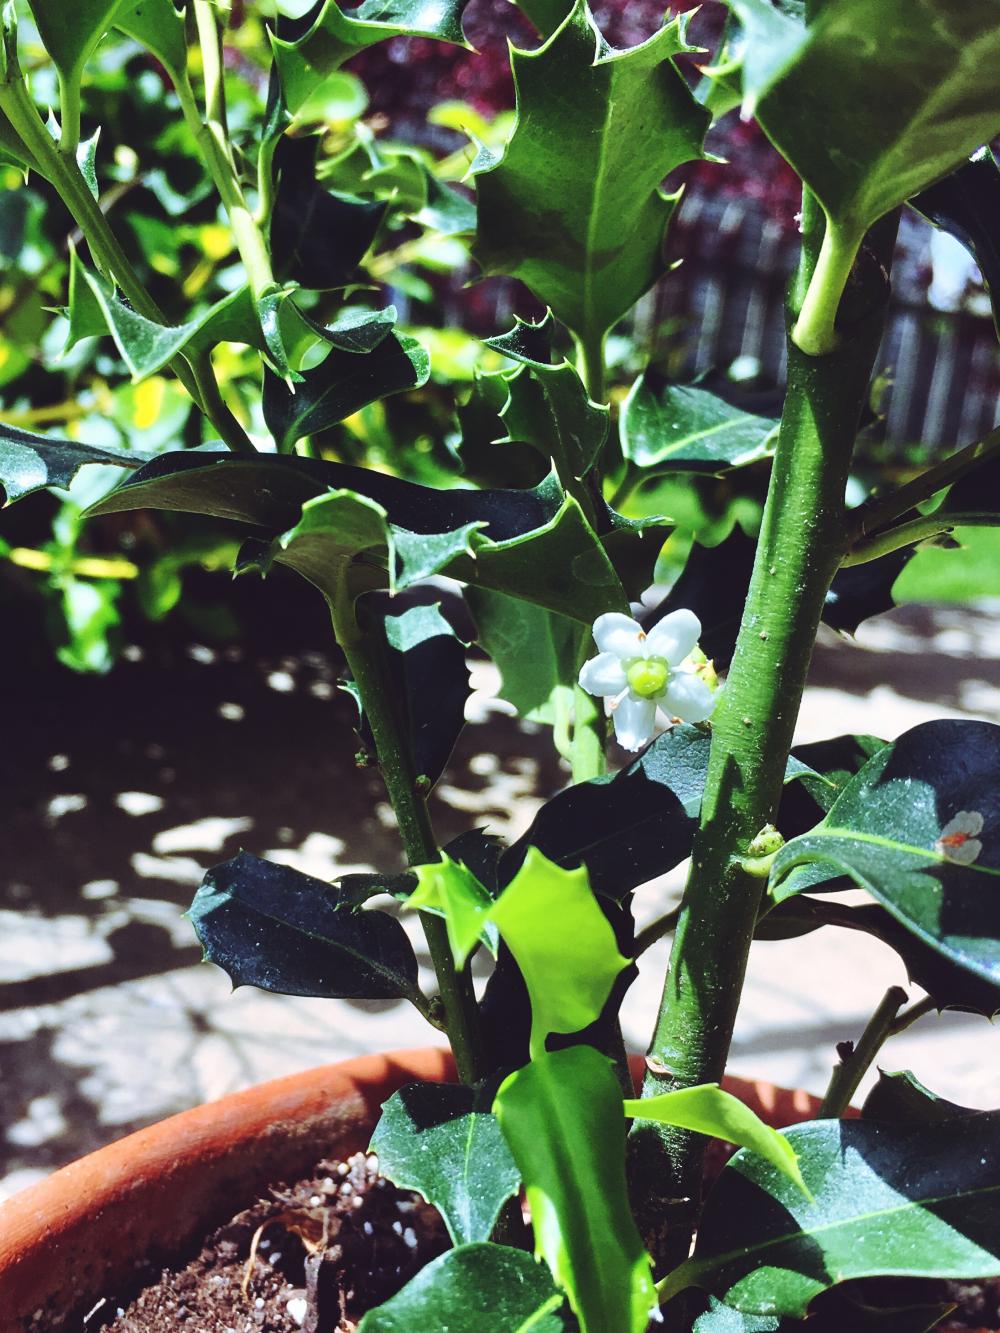 I never knew my Holly plant had flowers